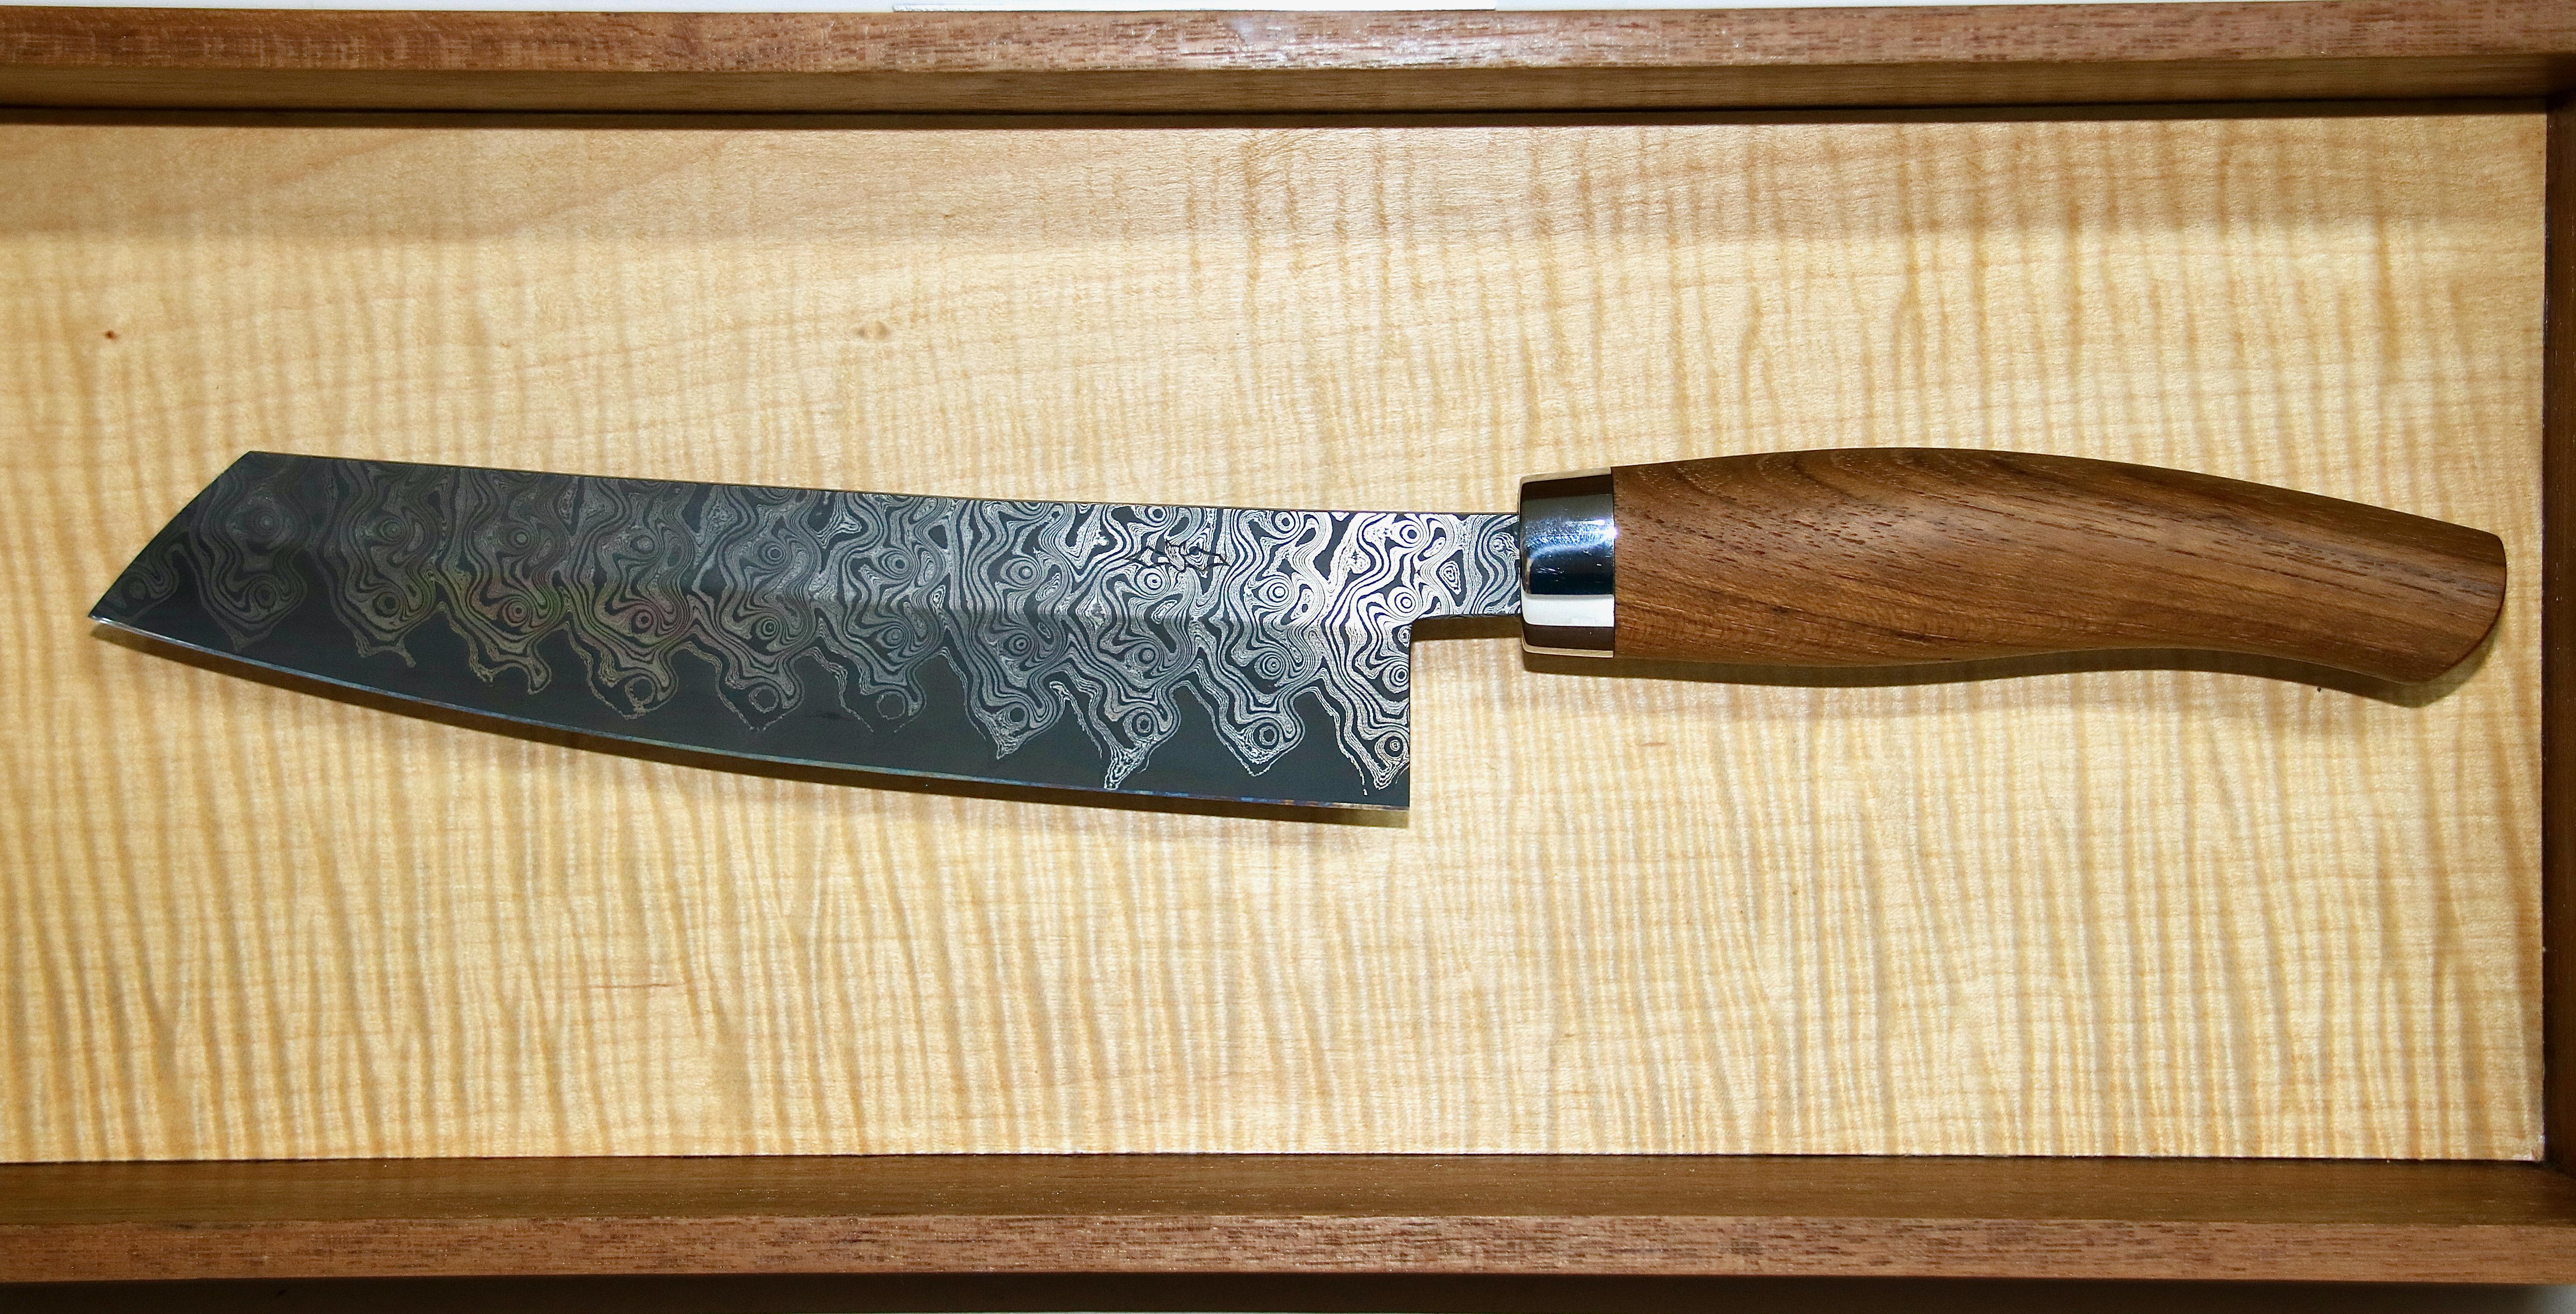 Nesmuk Mekka Premium Chef's Knife Damascus steel. Limited to only 25 pieces worldwide.

Teak, 361 layers of hand-forged Damascus steel, unique.

Islamic heritage meets traditional German craftsmanship, precision and high-tech. Only 25 of these